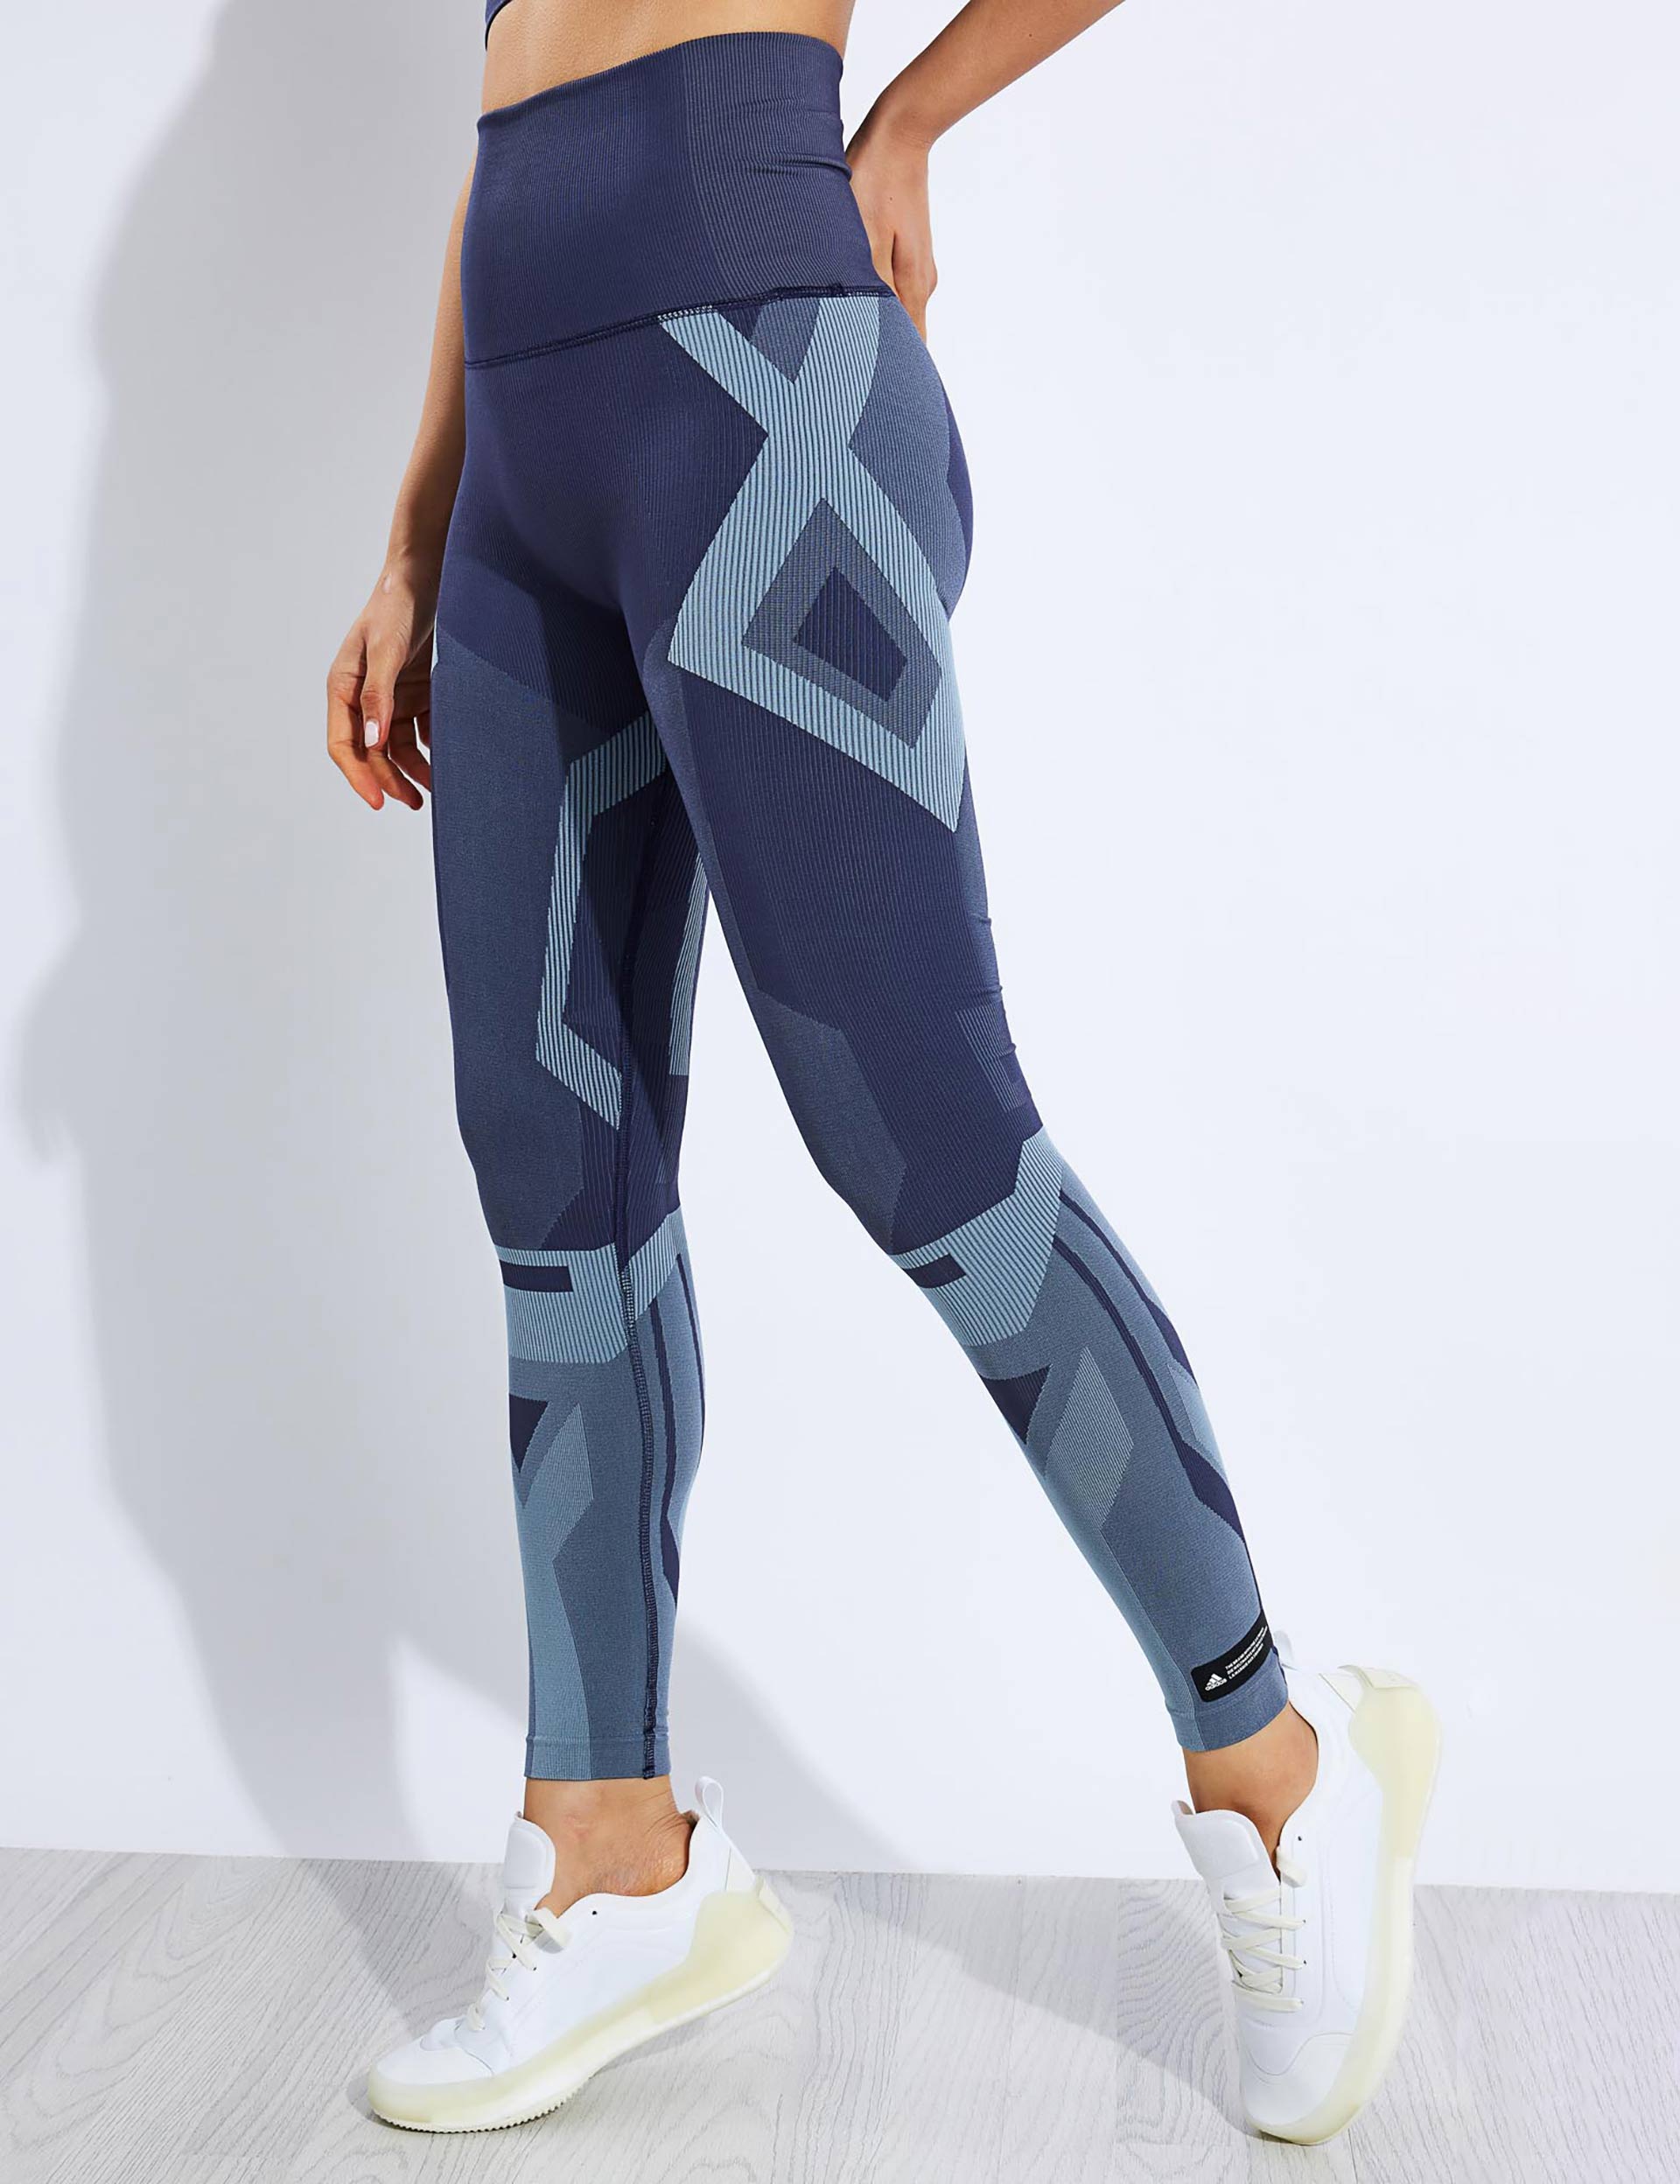 Adidas Formotion Sculpt Two-Tone Tights - Shadow Navy/Magic Greyimages1- The Sports Edit